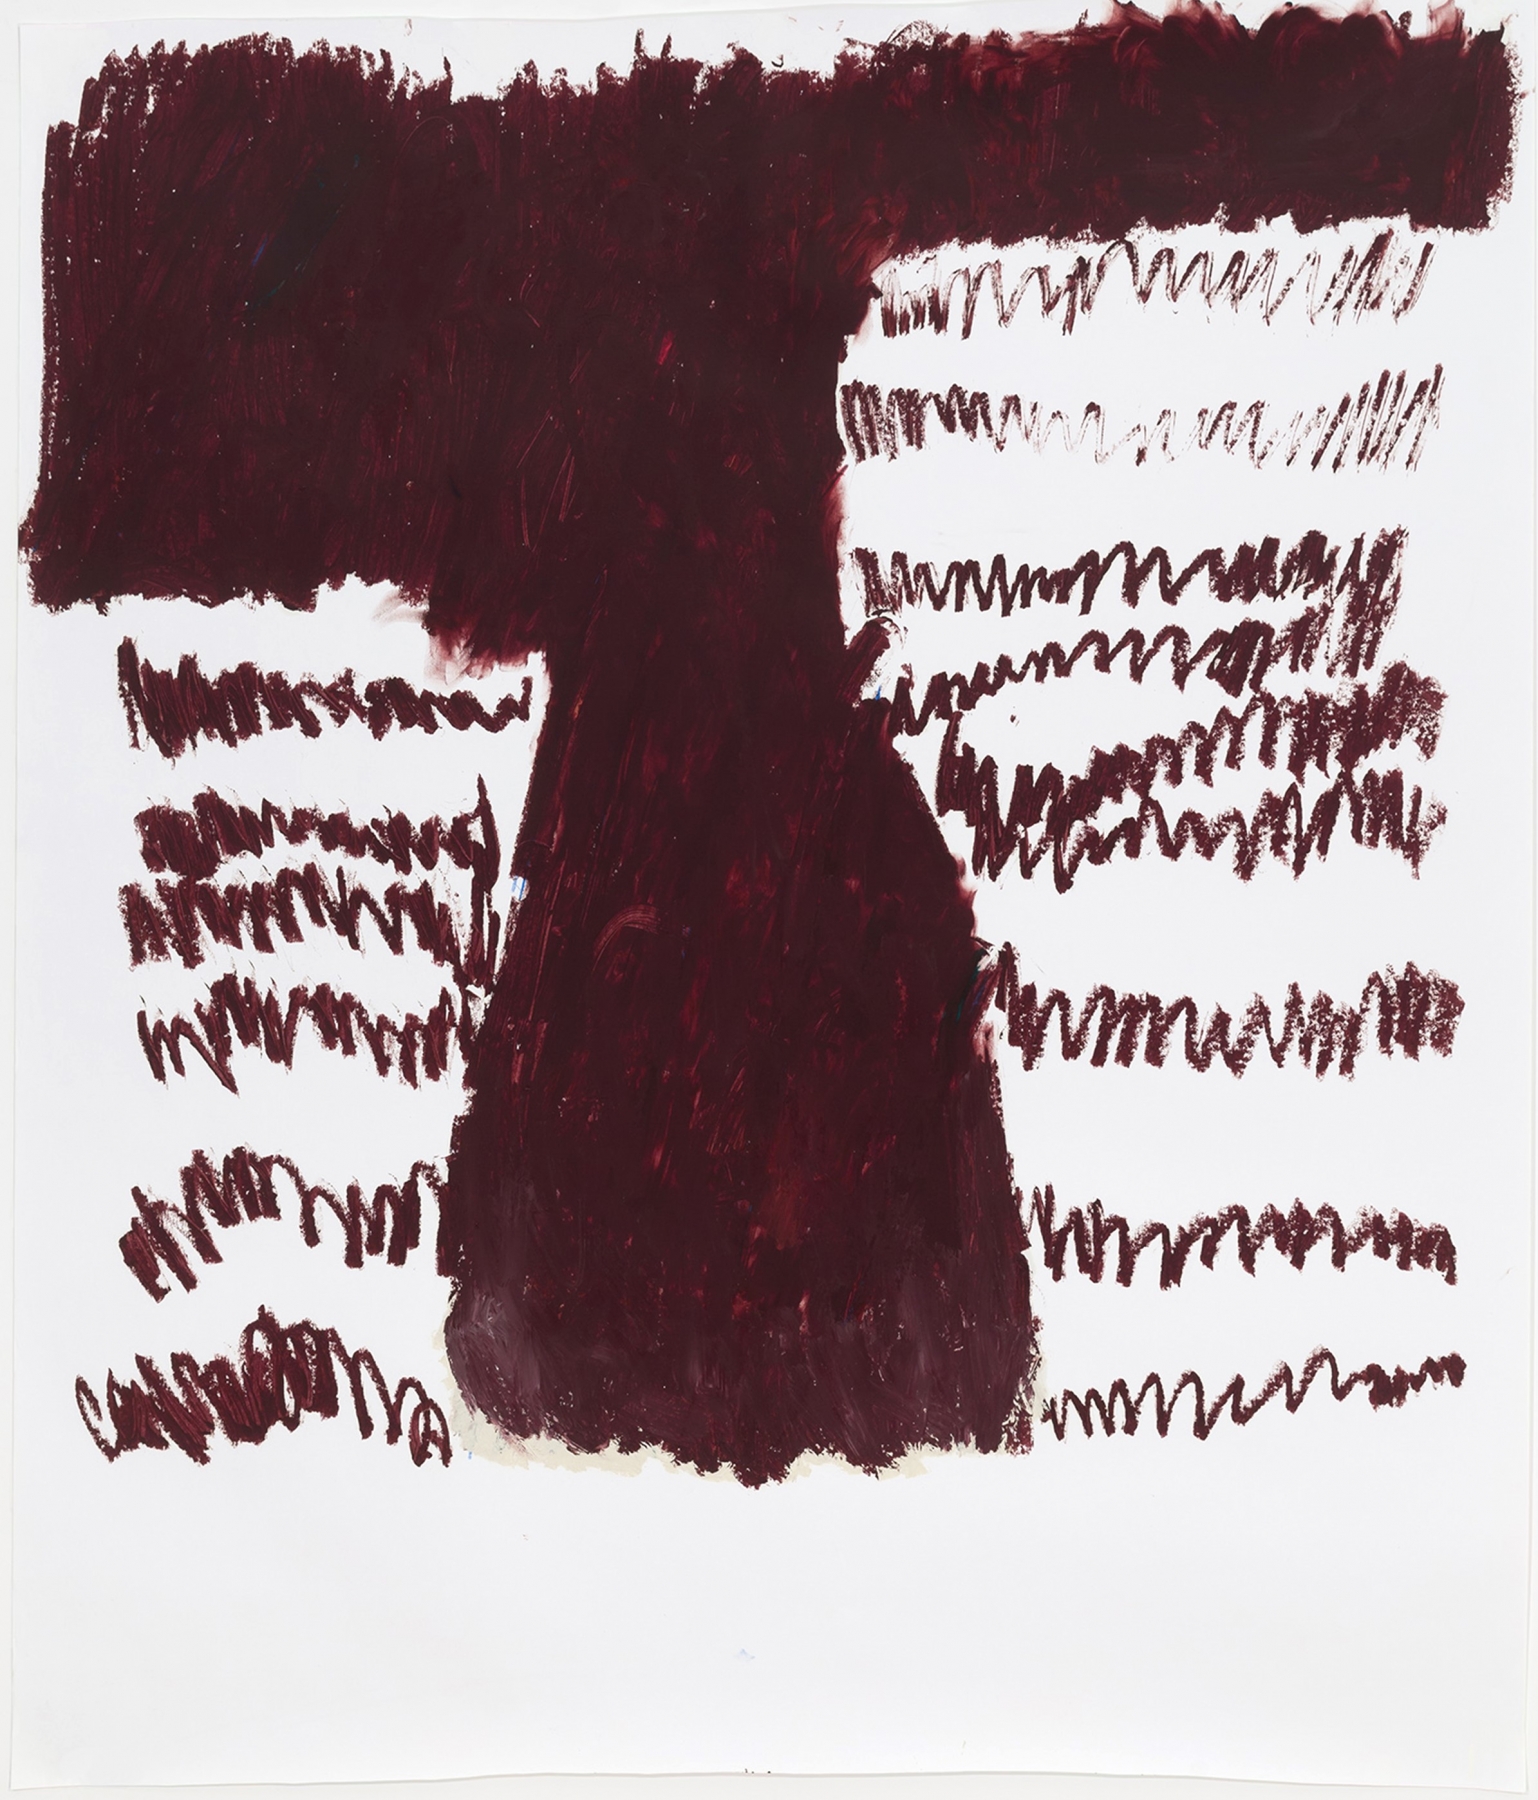 Esther Kl&amp;auml;s
NY/HERE, 2018
Oil stick on paper
56 1/2 x 48 inches (143.5 x 121.9 cm)

Inquire
&amp;nbsp;